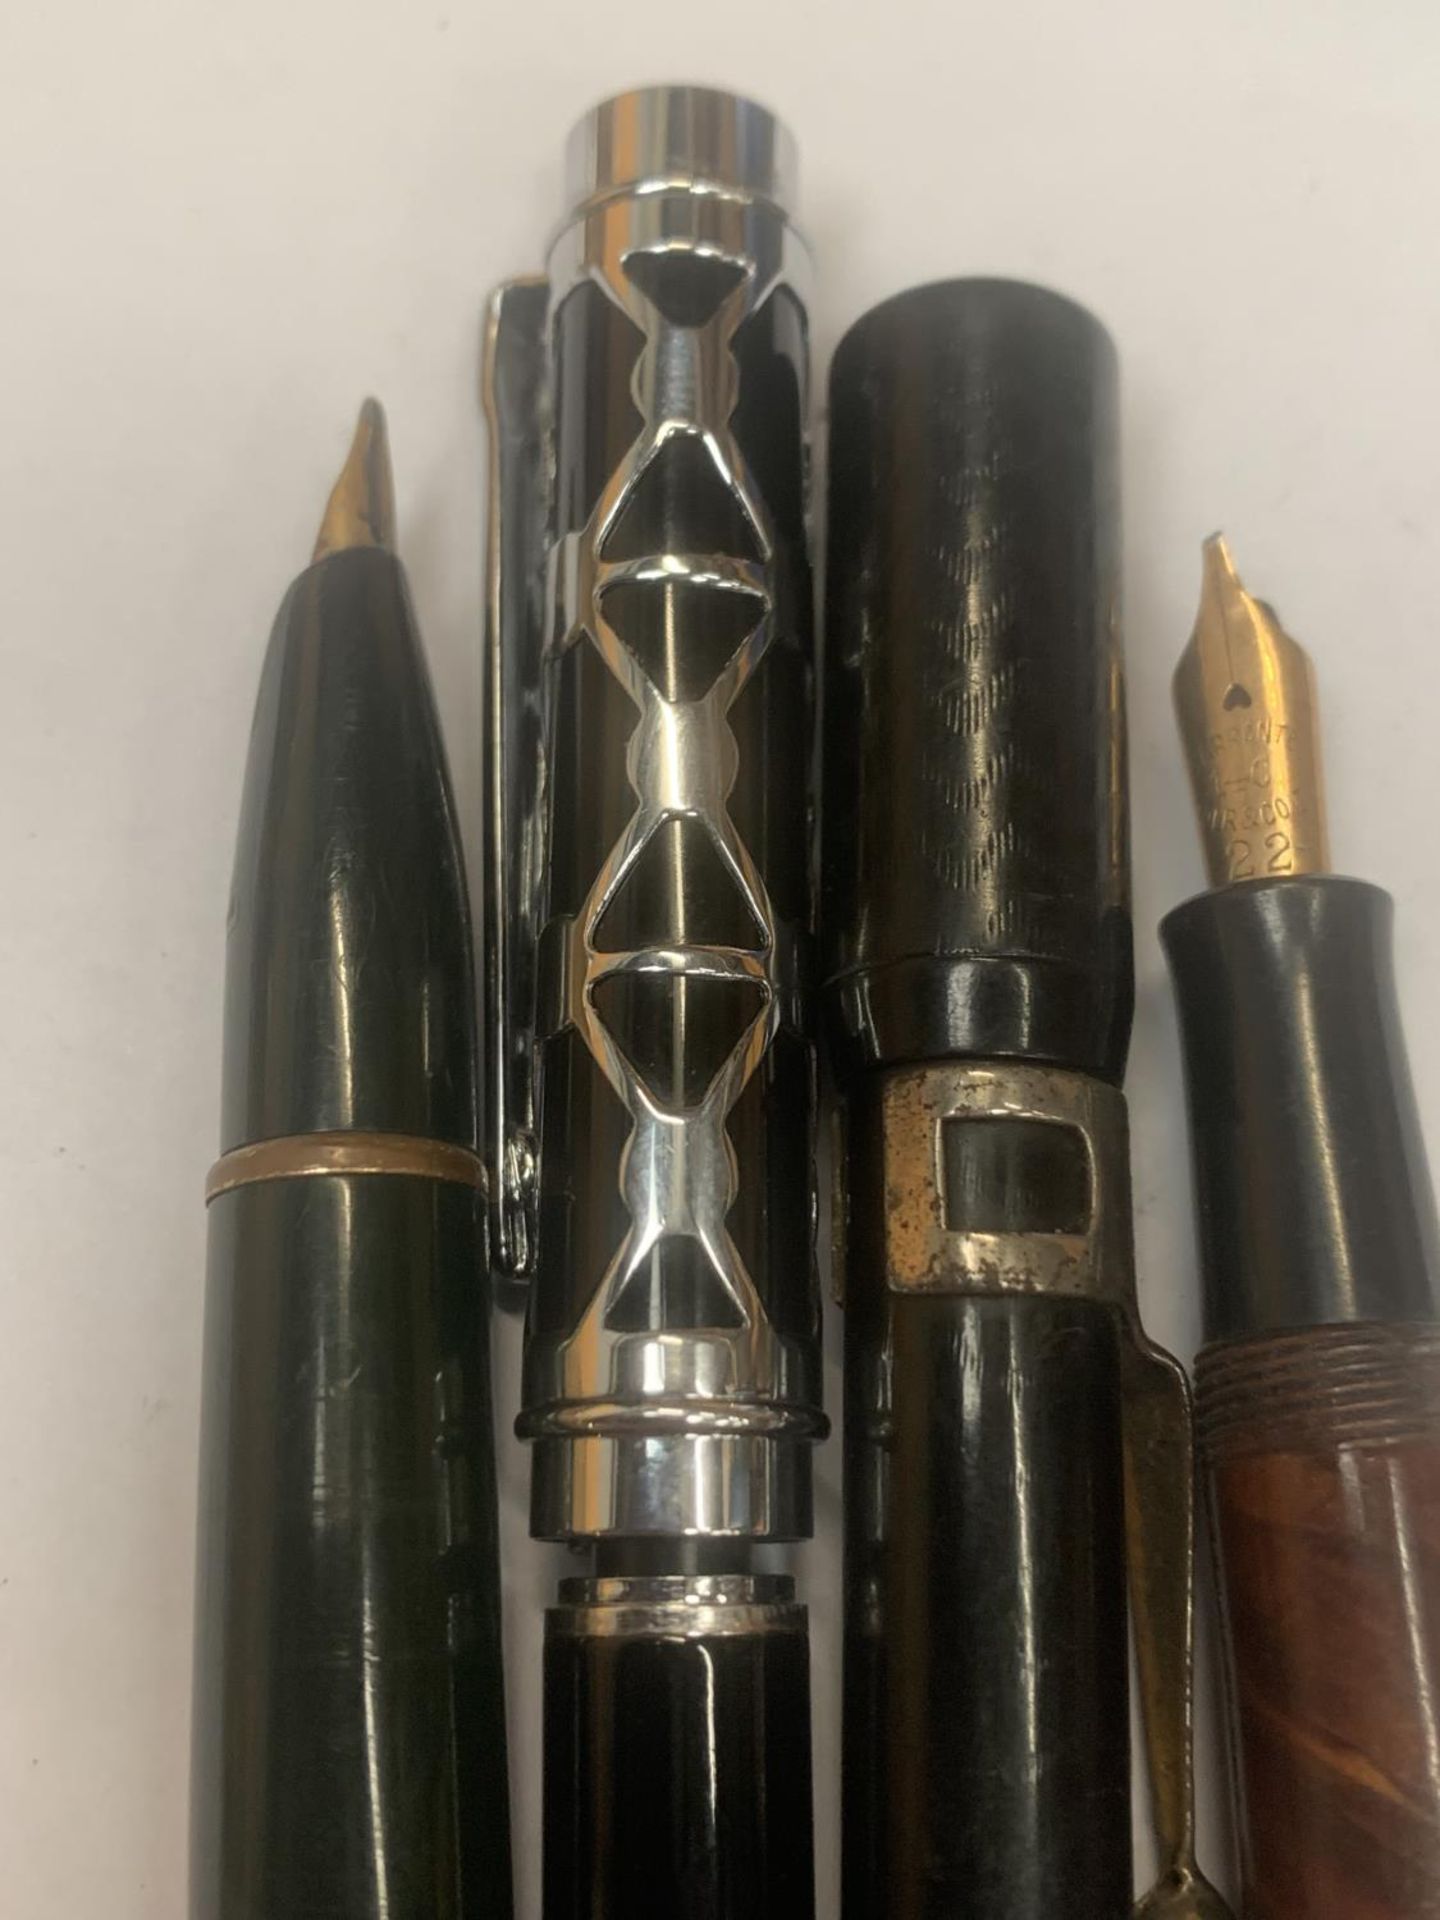 FOUR VARIOUS PENS TO INCLUDE THREE FOUNTAIN PENS AND A BIRO ALL A/F - Image 2 of 2